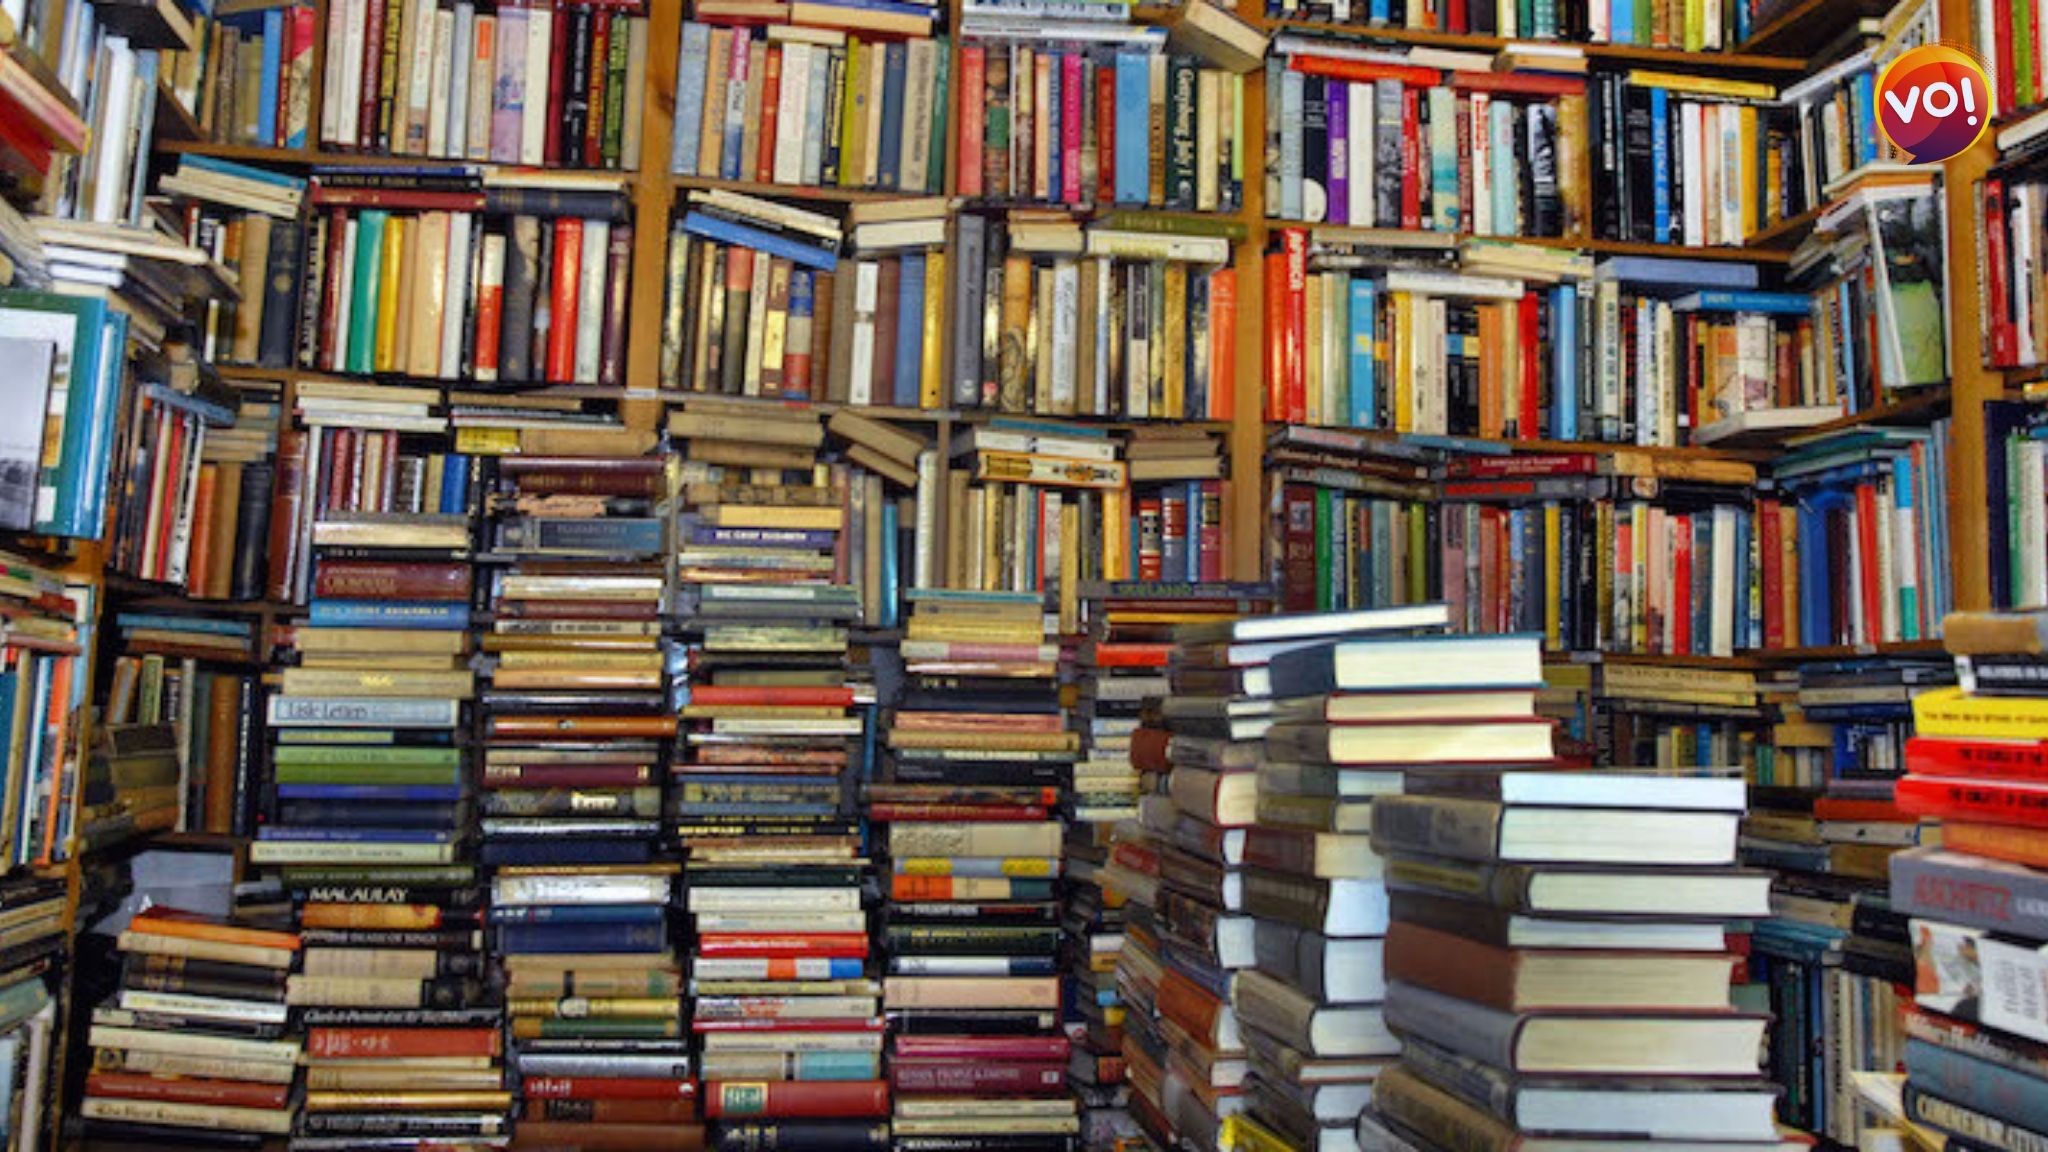 Meet The Book Lover Who Spent Over Rs 3 Lakh At Kolkata Book Fair And Owns 14,000 Books